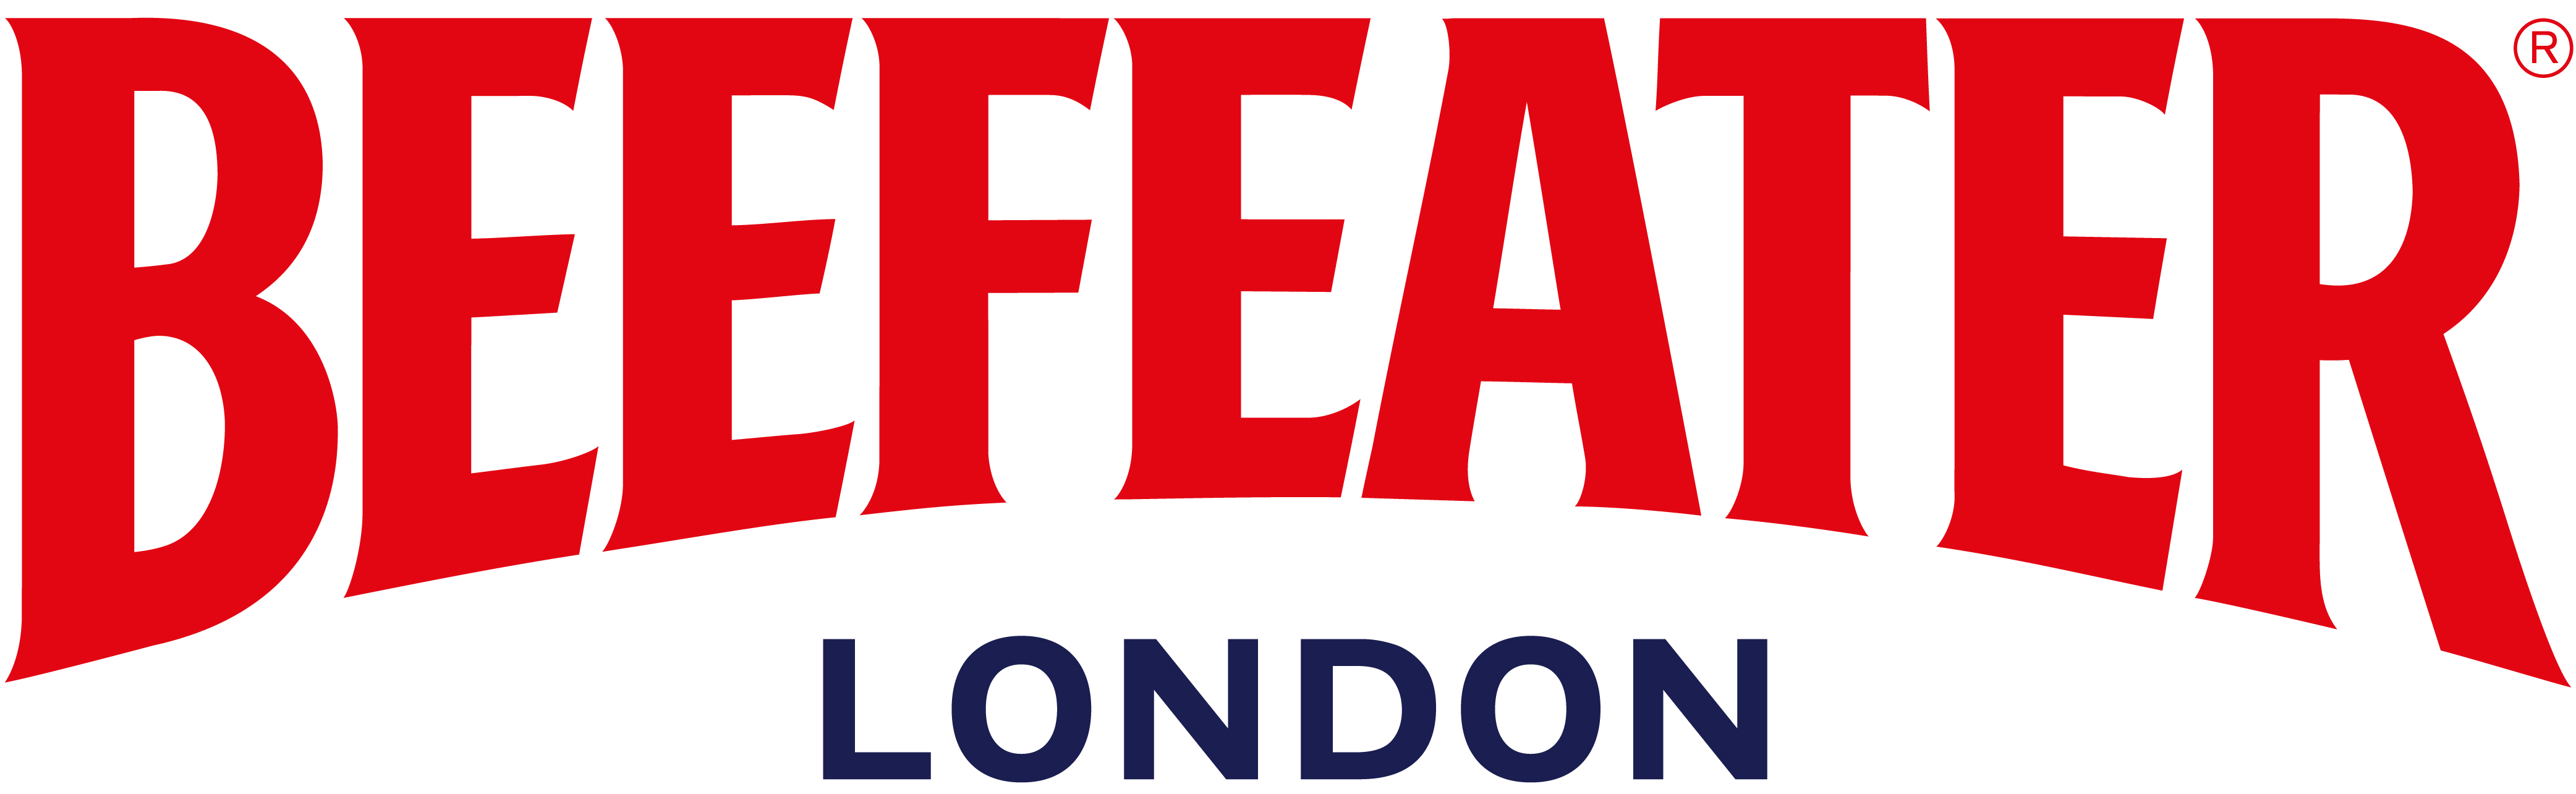 1580326390_beefeater-dry-logo